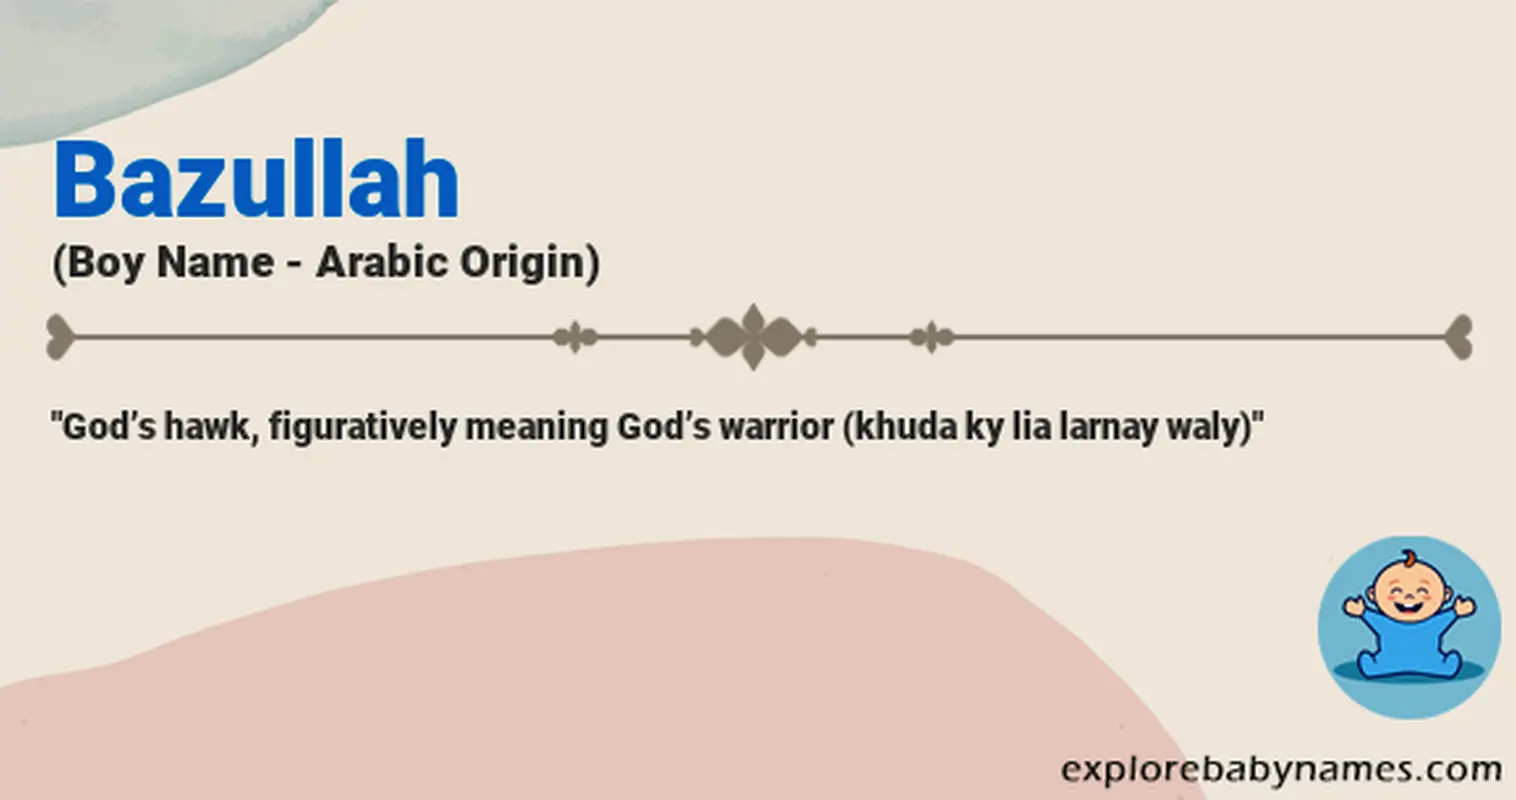 Meaning of Bazullah